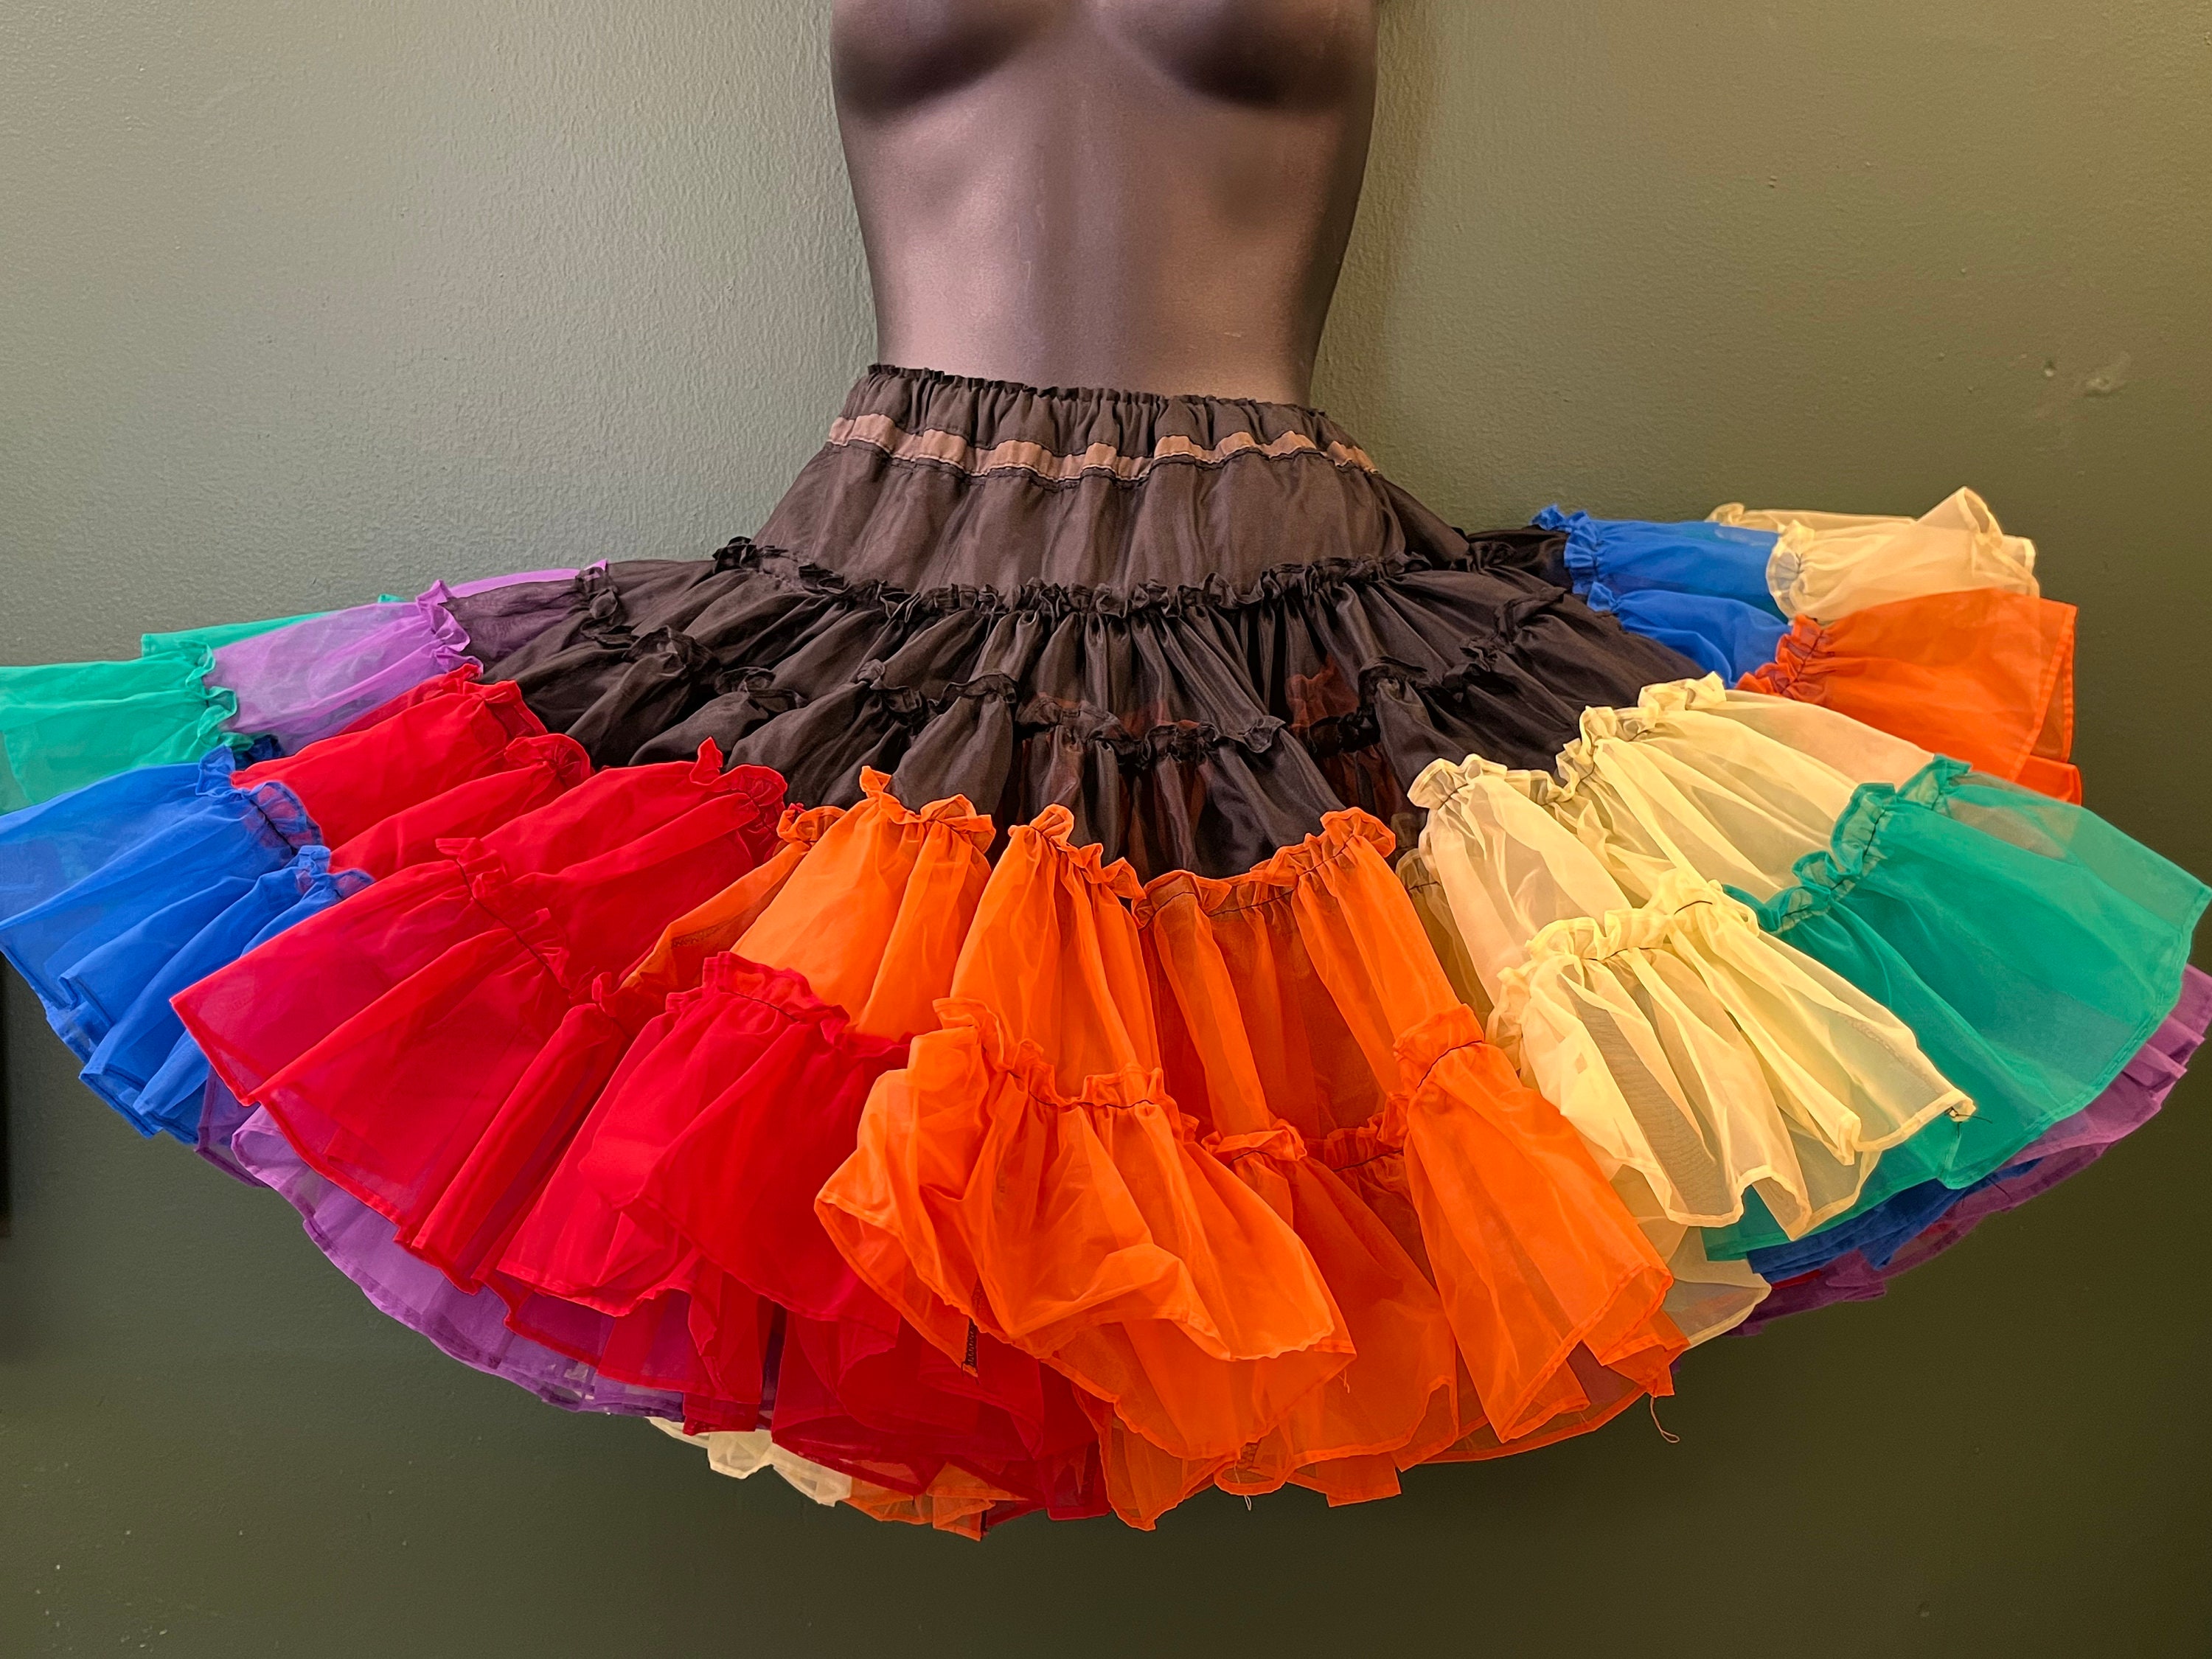 Plus Size Nylon Chiffon Petticoat - Available in 4 Colors – Make Your Own  Dance Costume